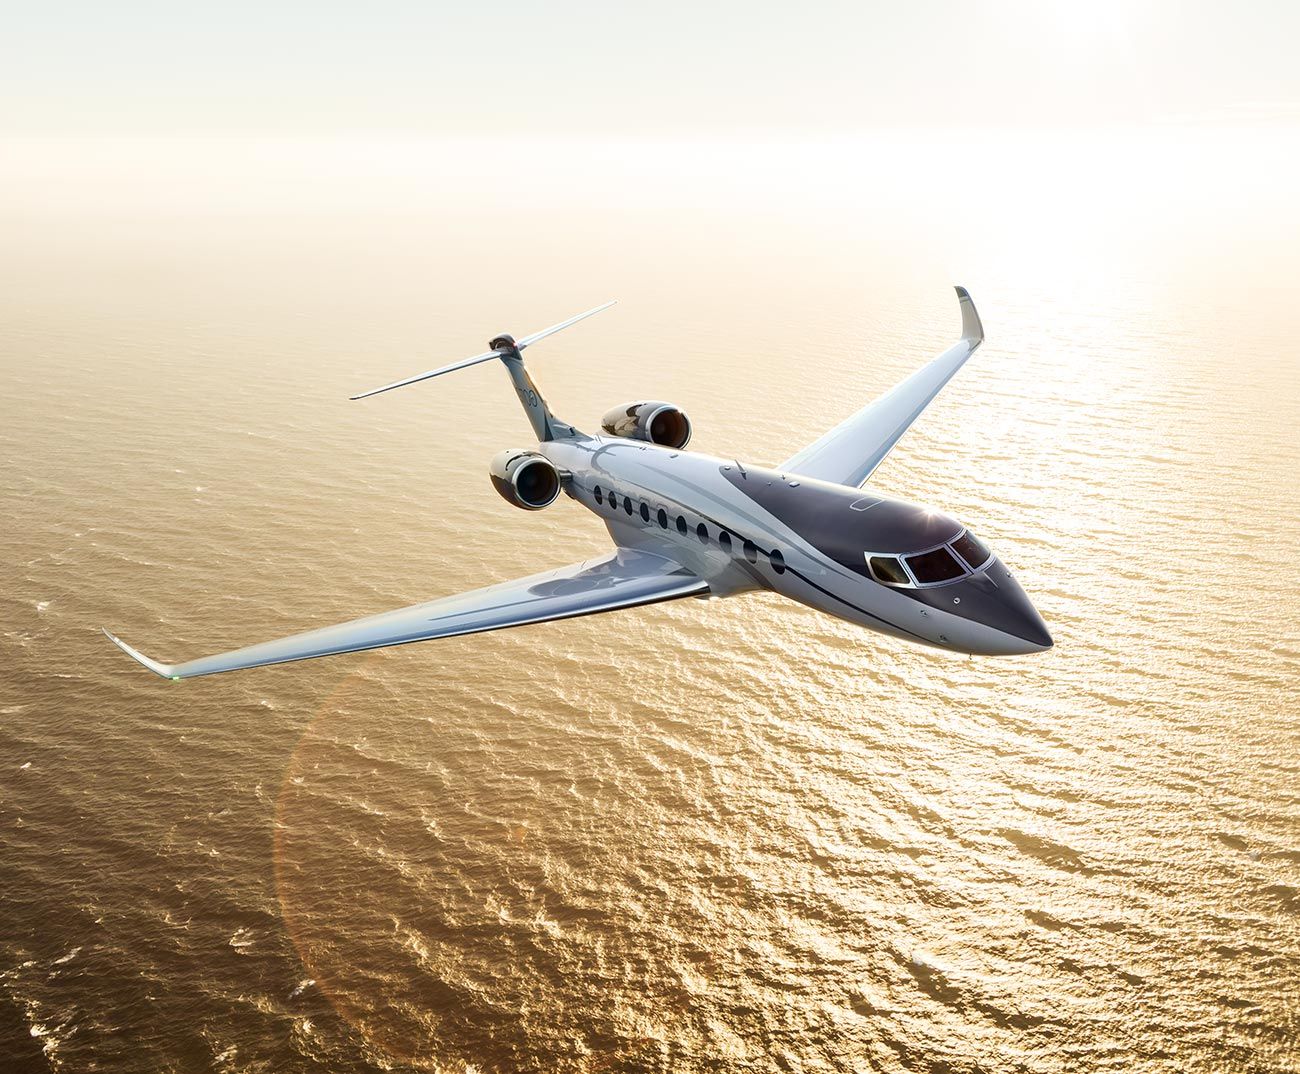 How Much Does It Cost To Rent A Private Jet?